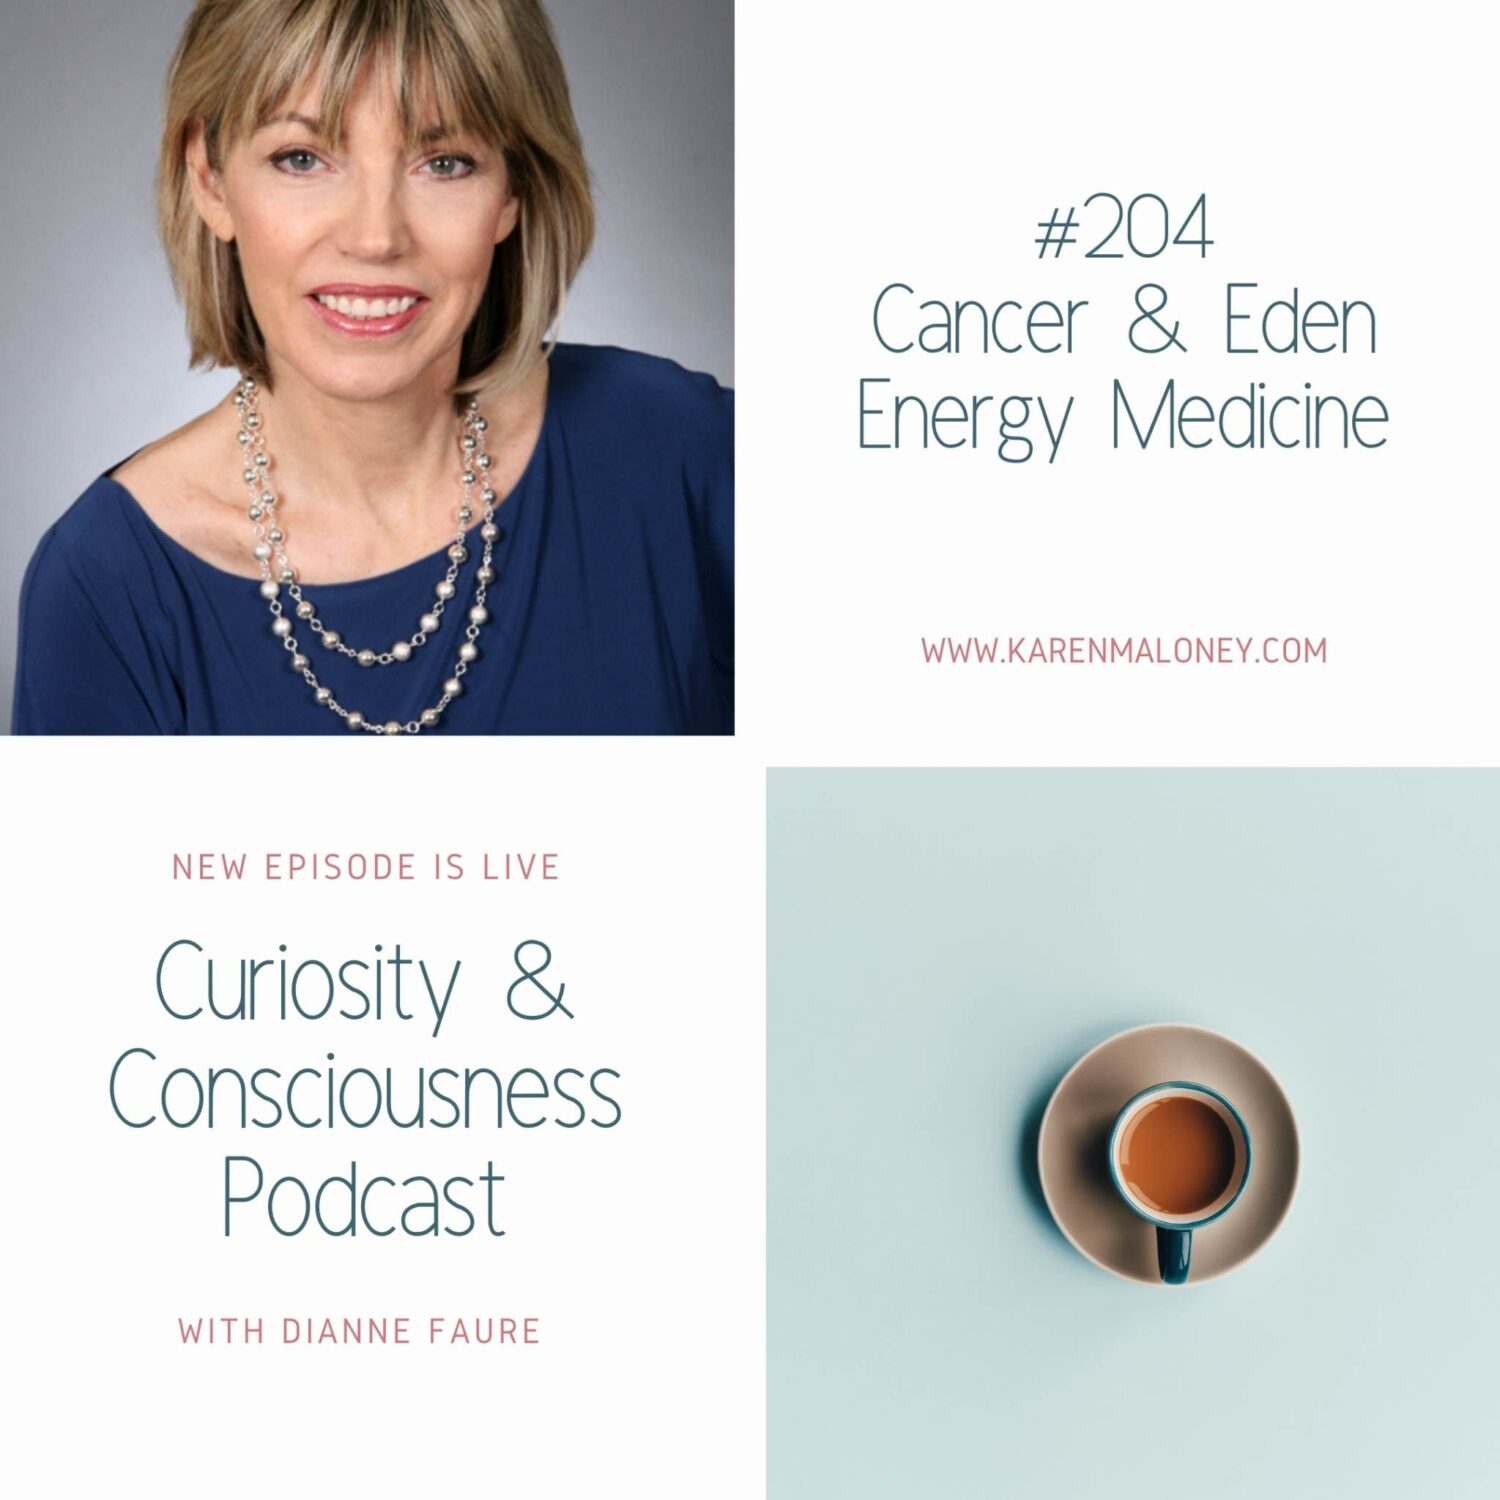 Dianne Faure podcast